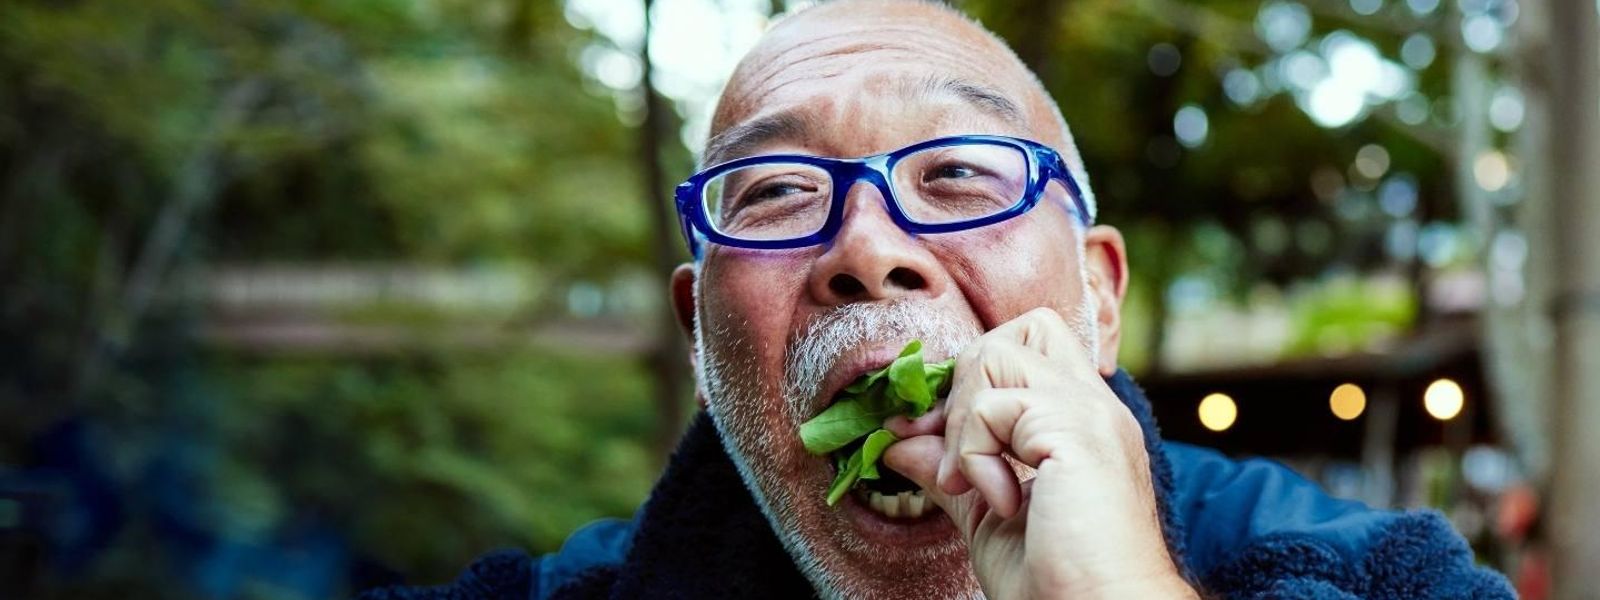 Happy man with blue glasses eating healthy